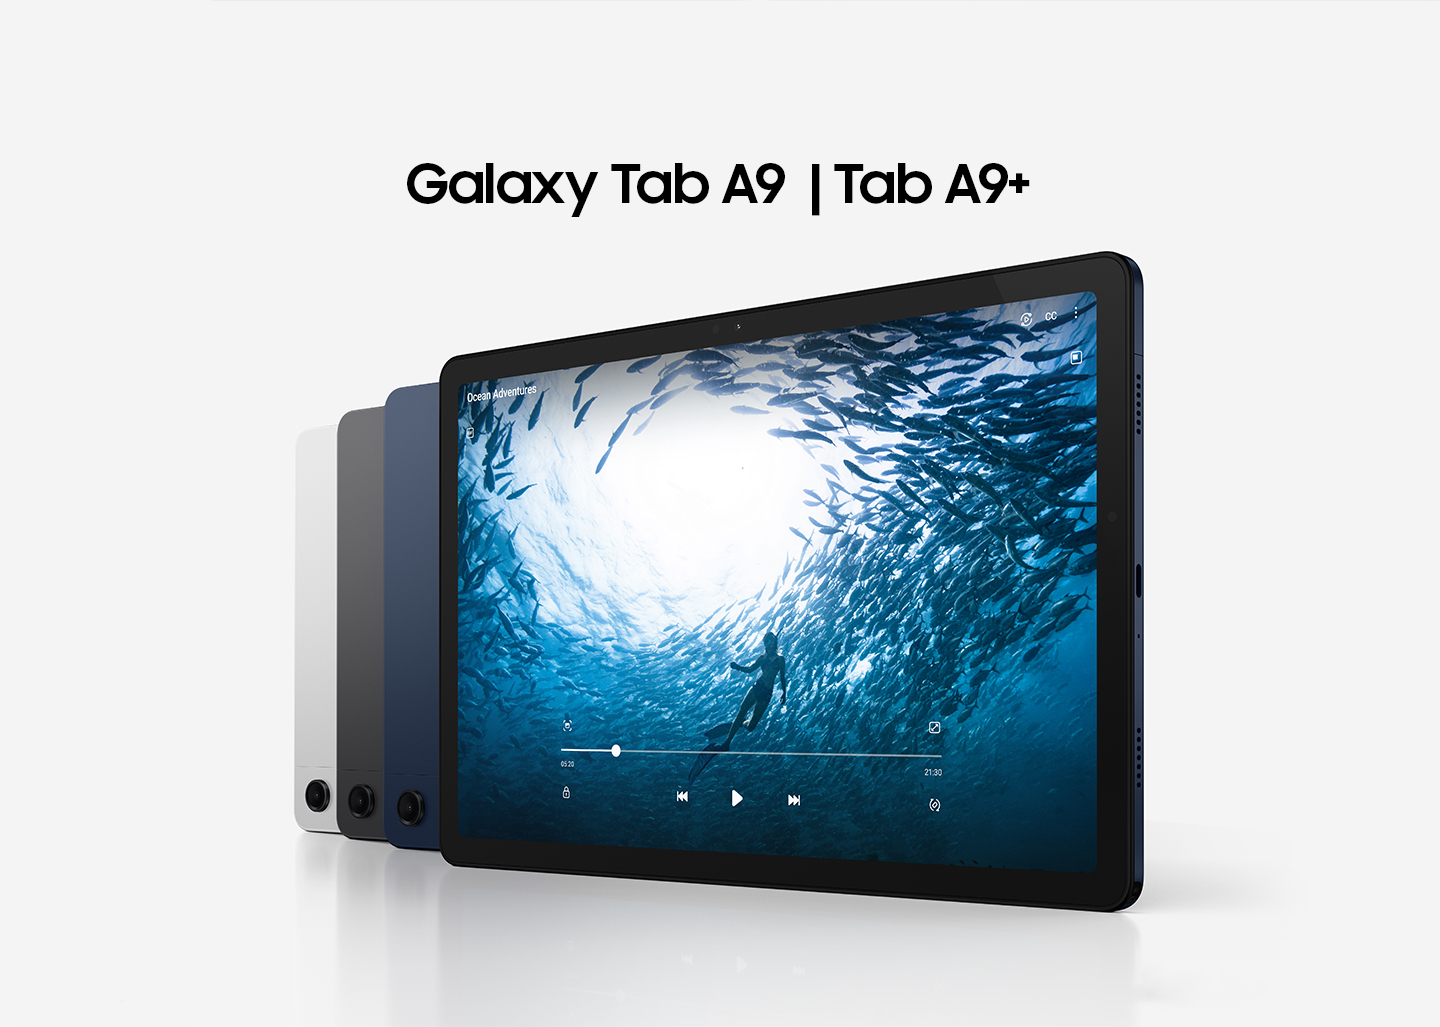 Samsung launches Galaxy Tab A (8-inch) with 5,100mAh battery